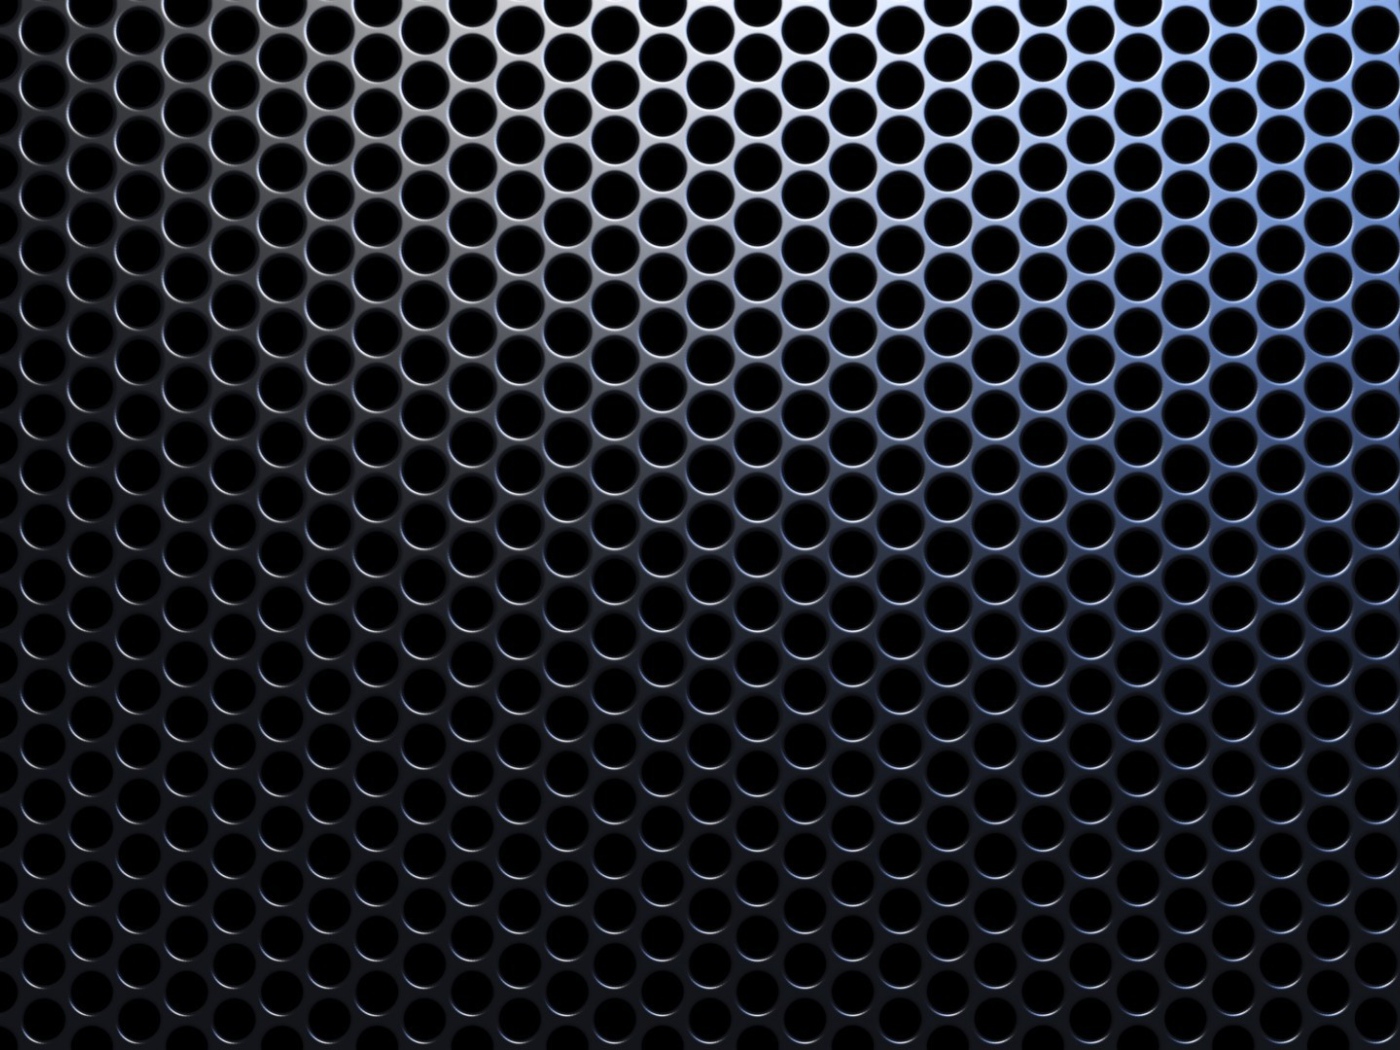 Grille with round holes